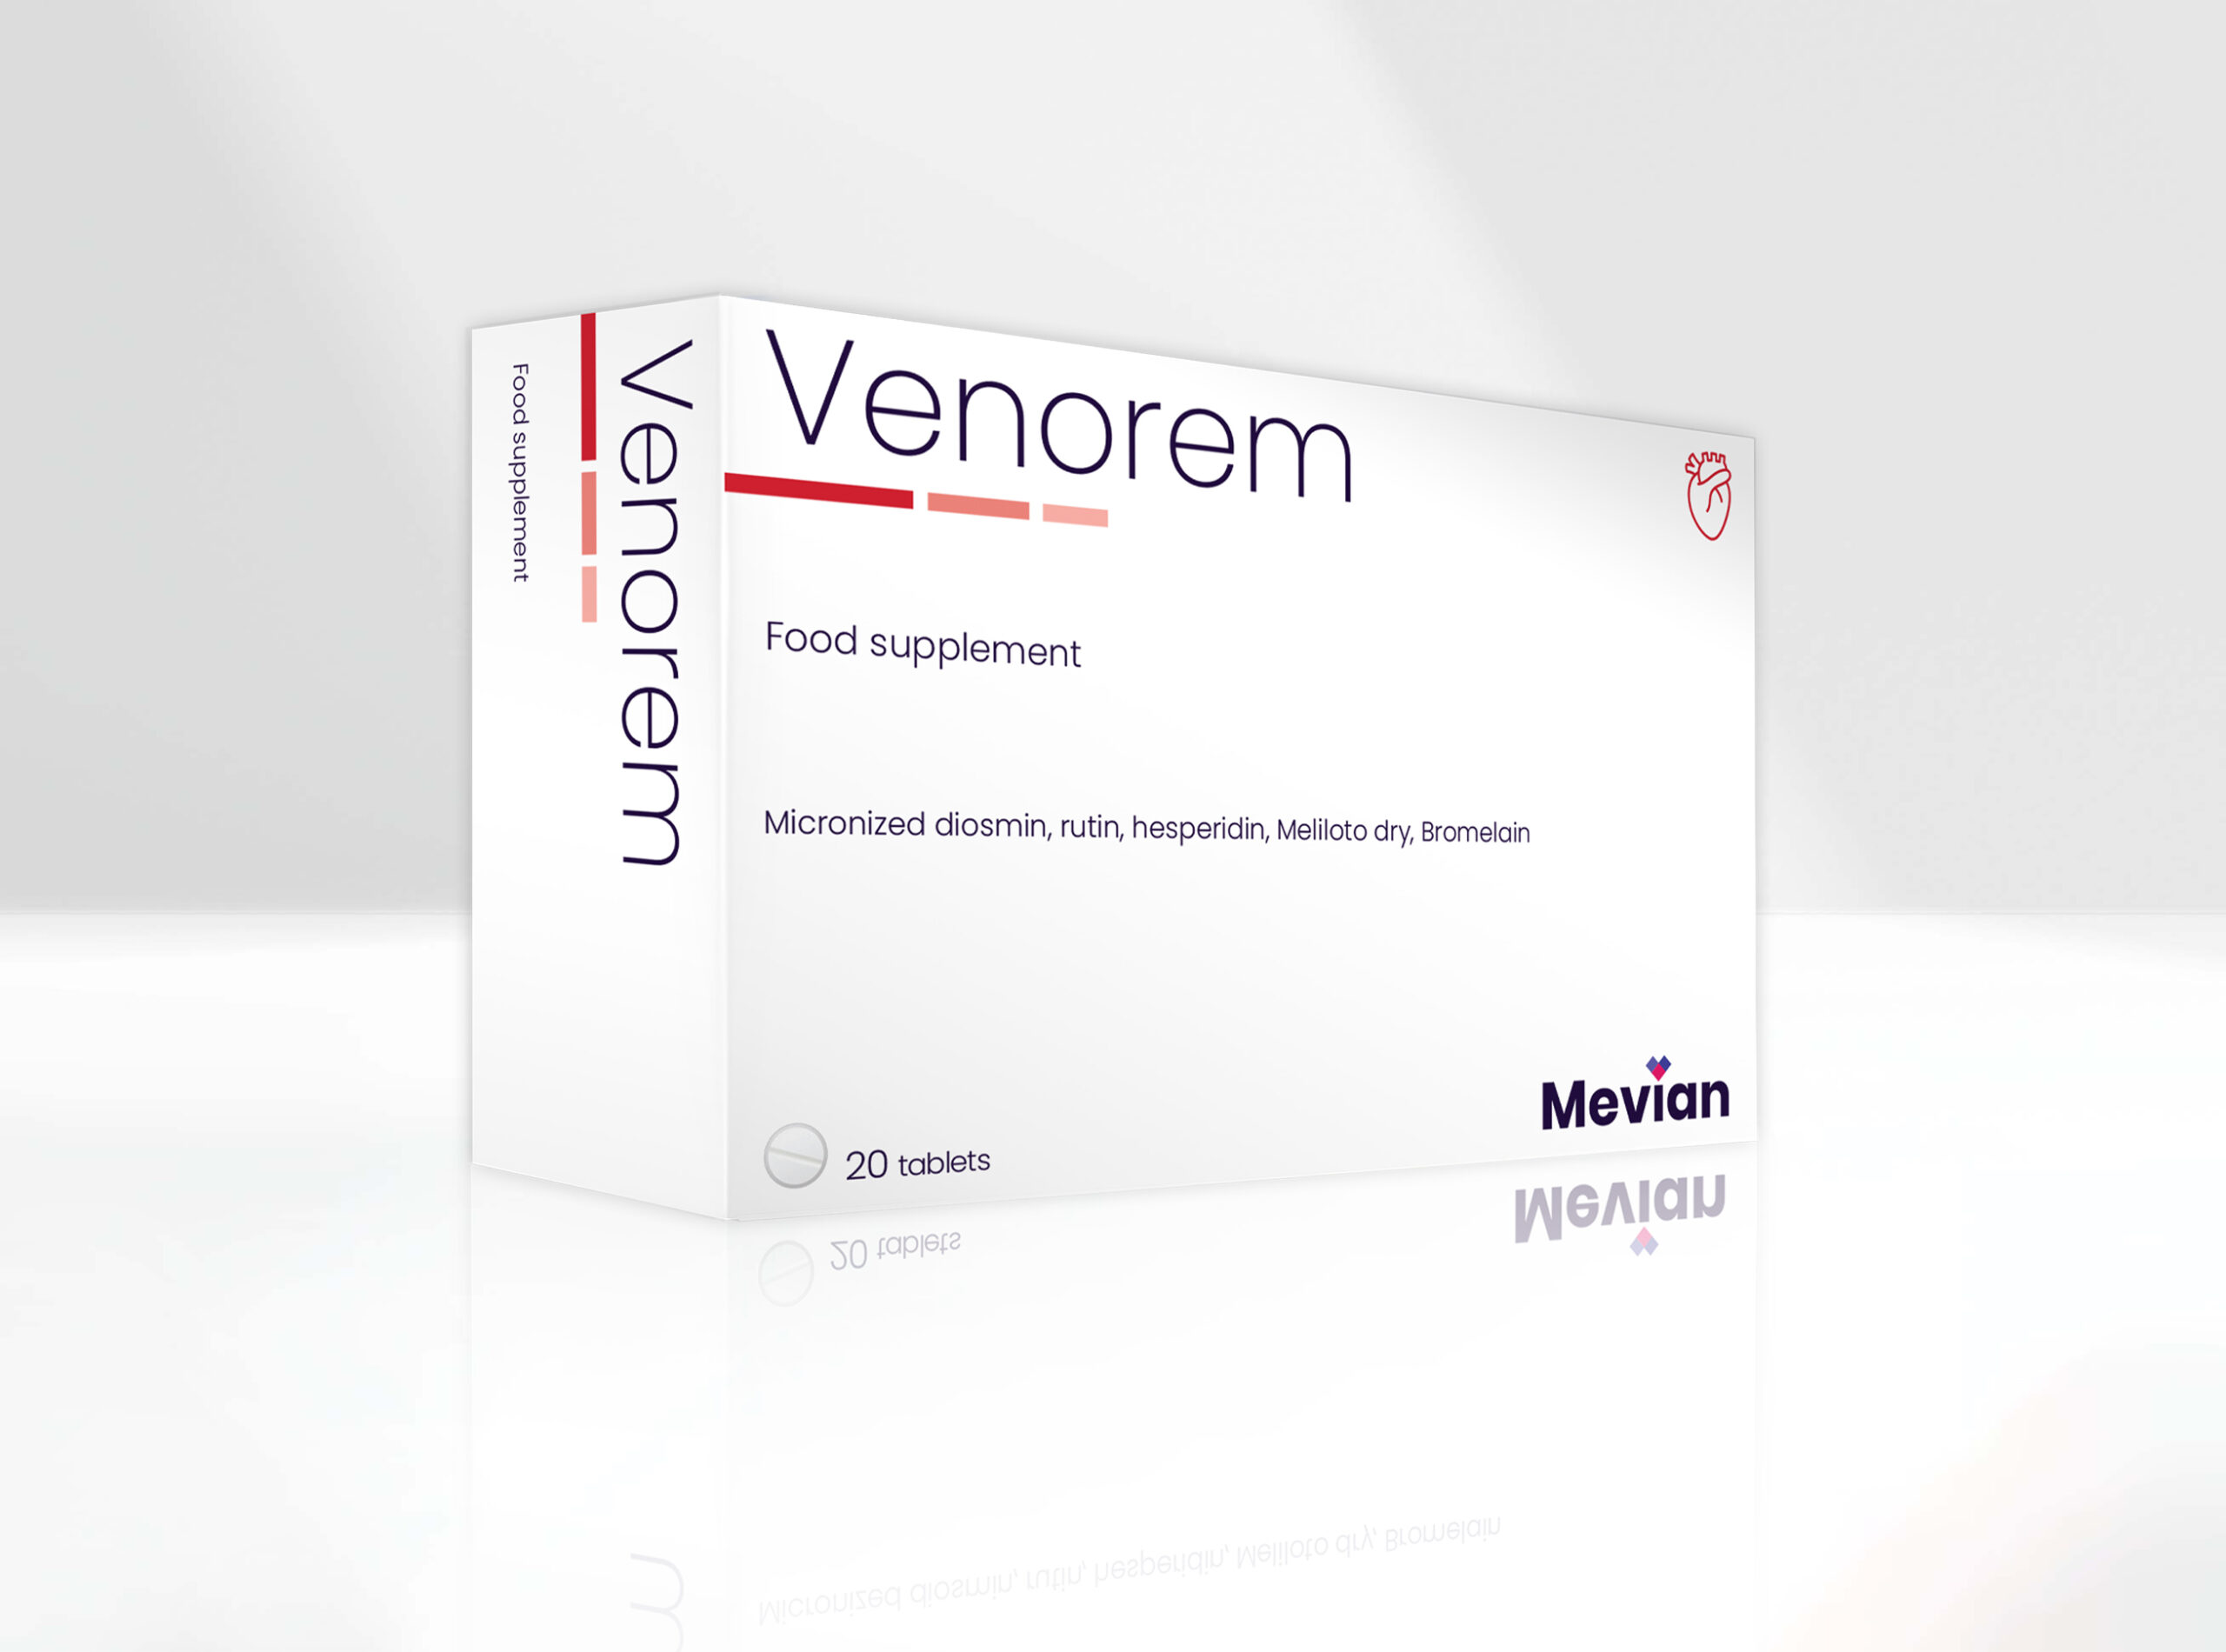 Venorem is ideal to enhance the functionality of venous circulation and microcirculation (hemorrhoidal plexus, poor circulation, tingling, Itching, Burning) and Hemorrhoidal Pathology.